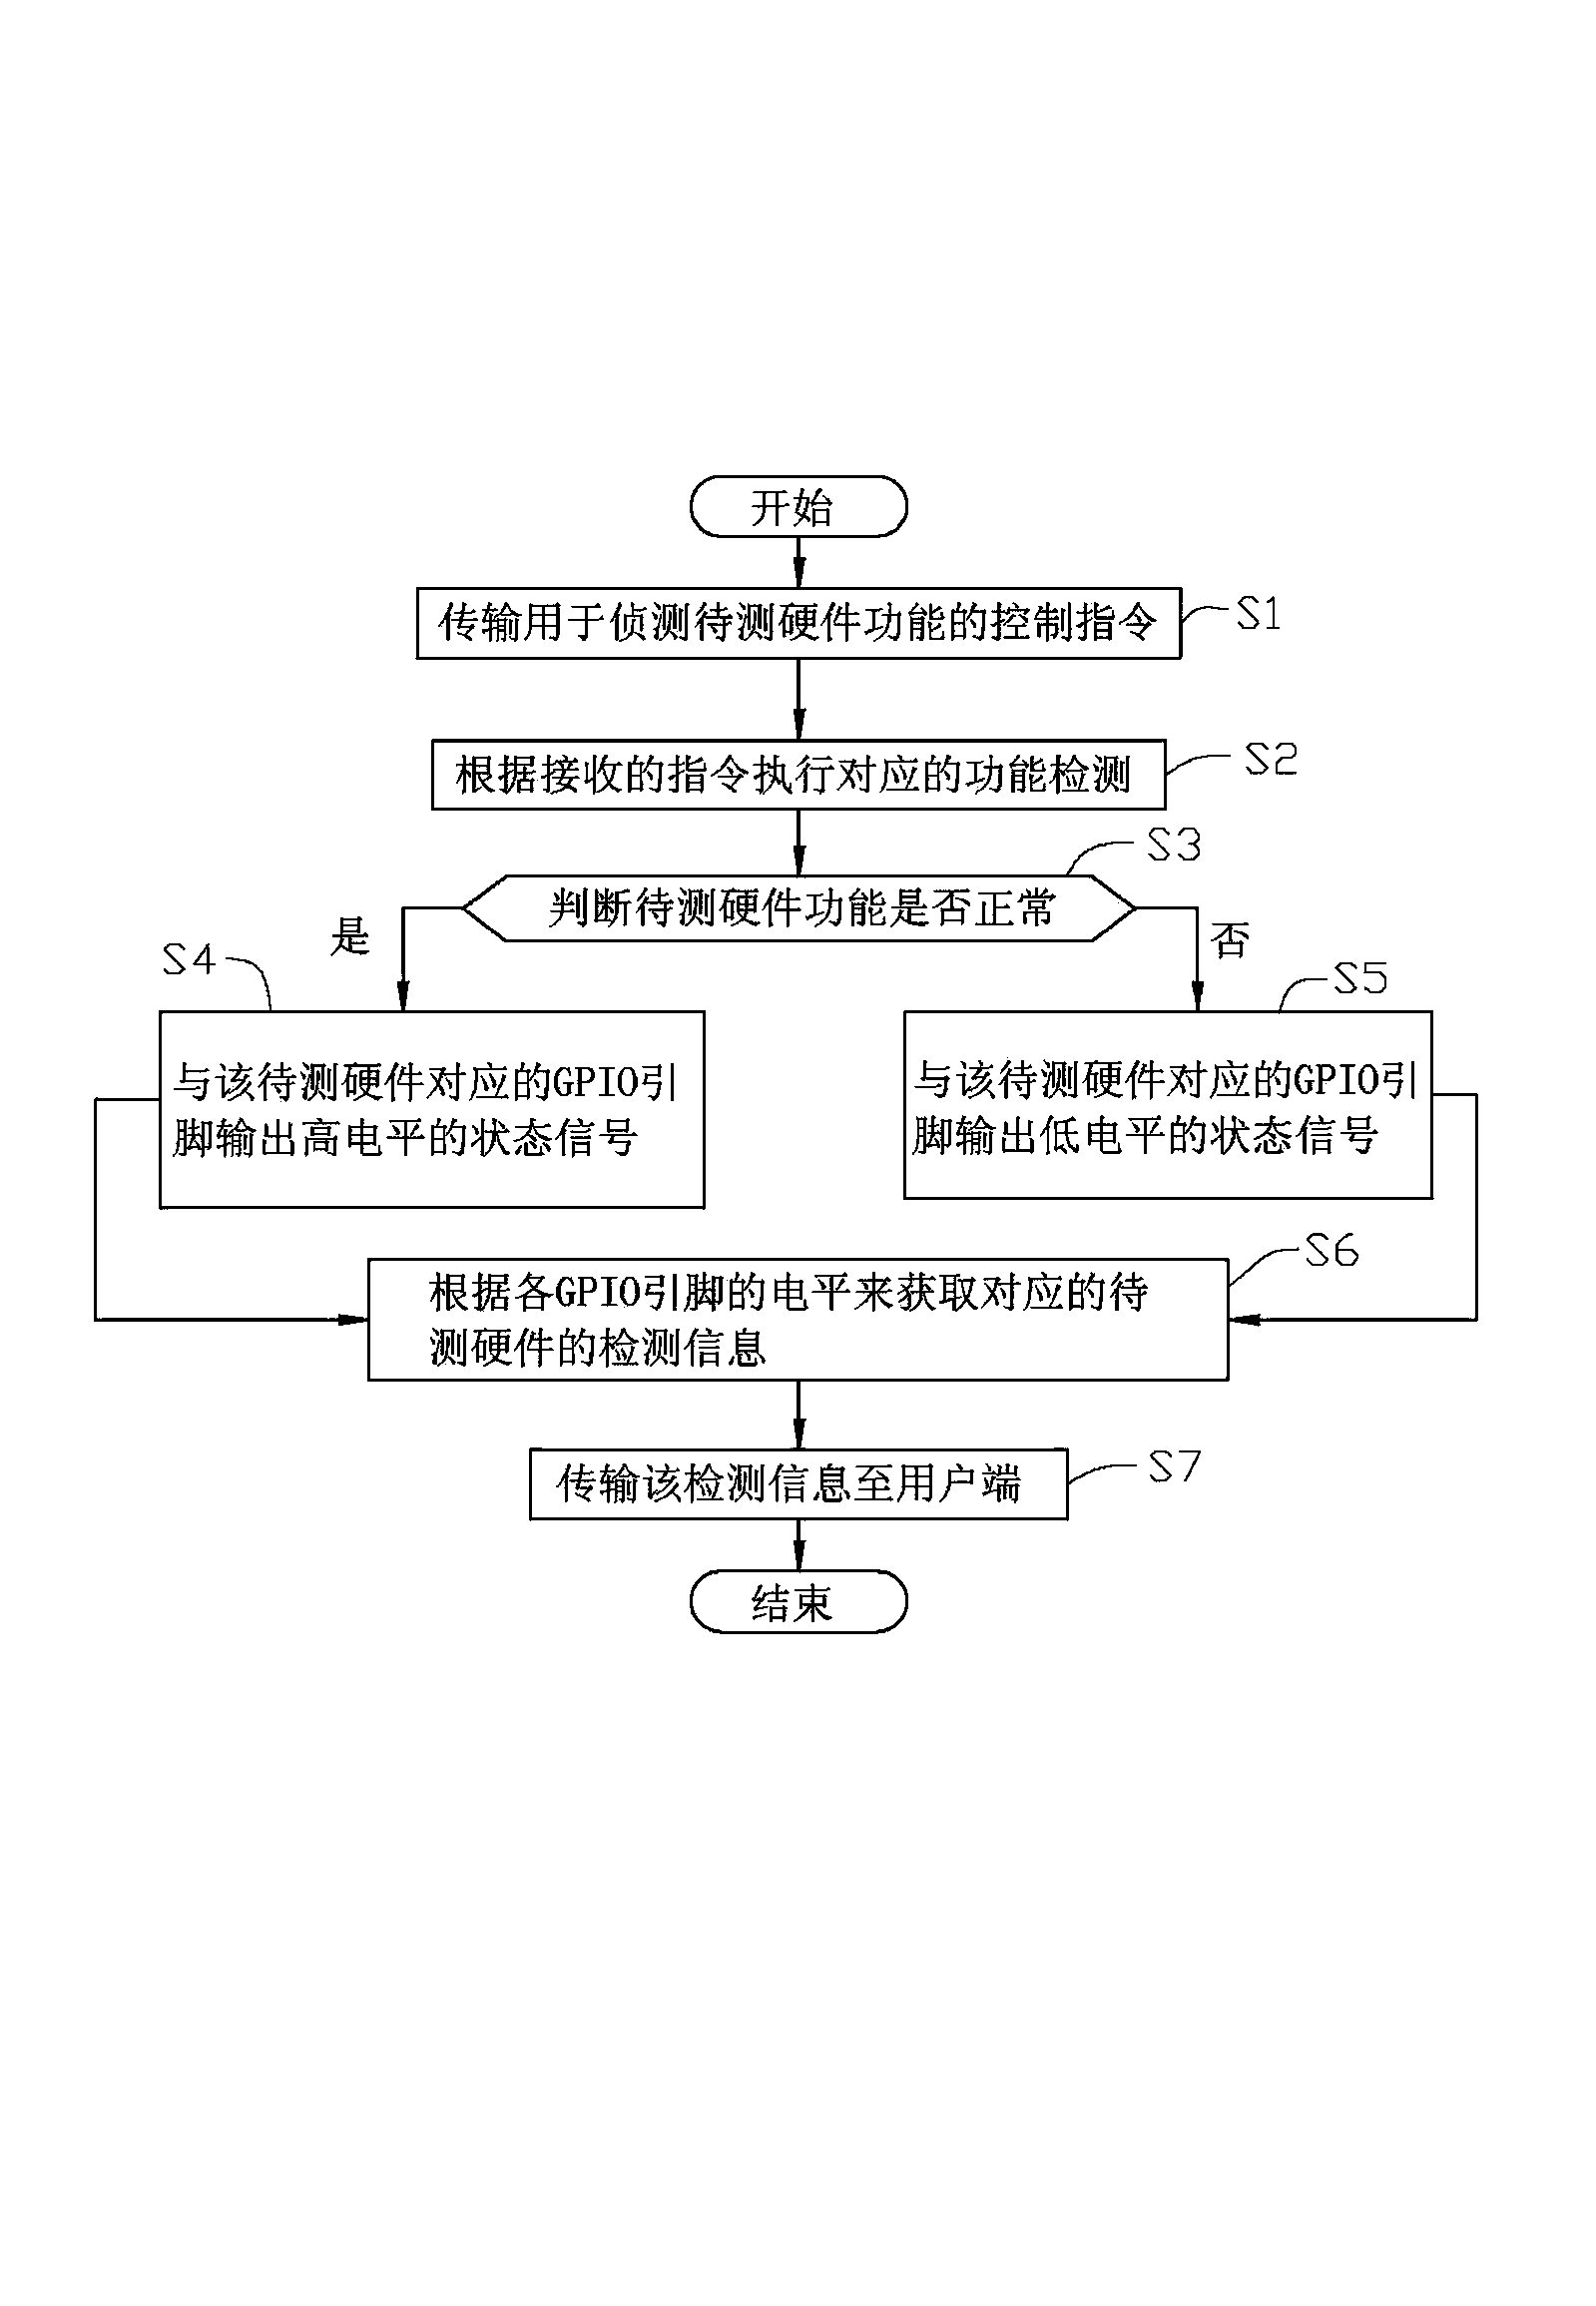 Computer testing system and method